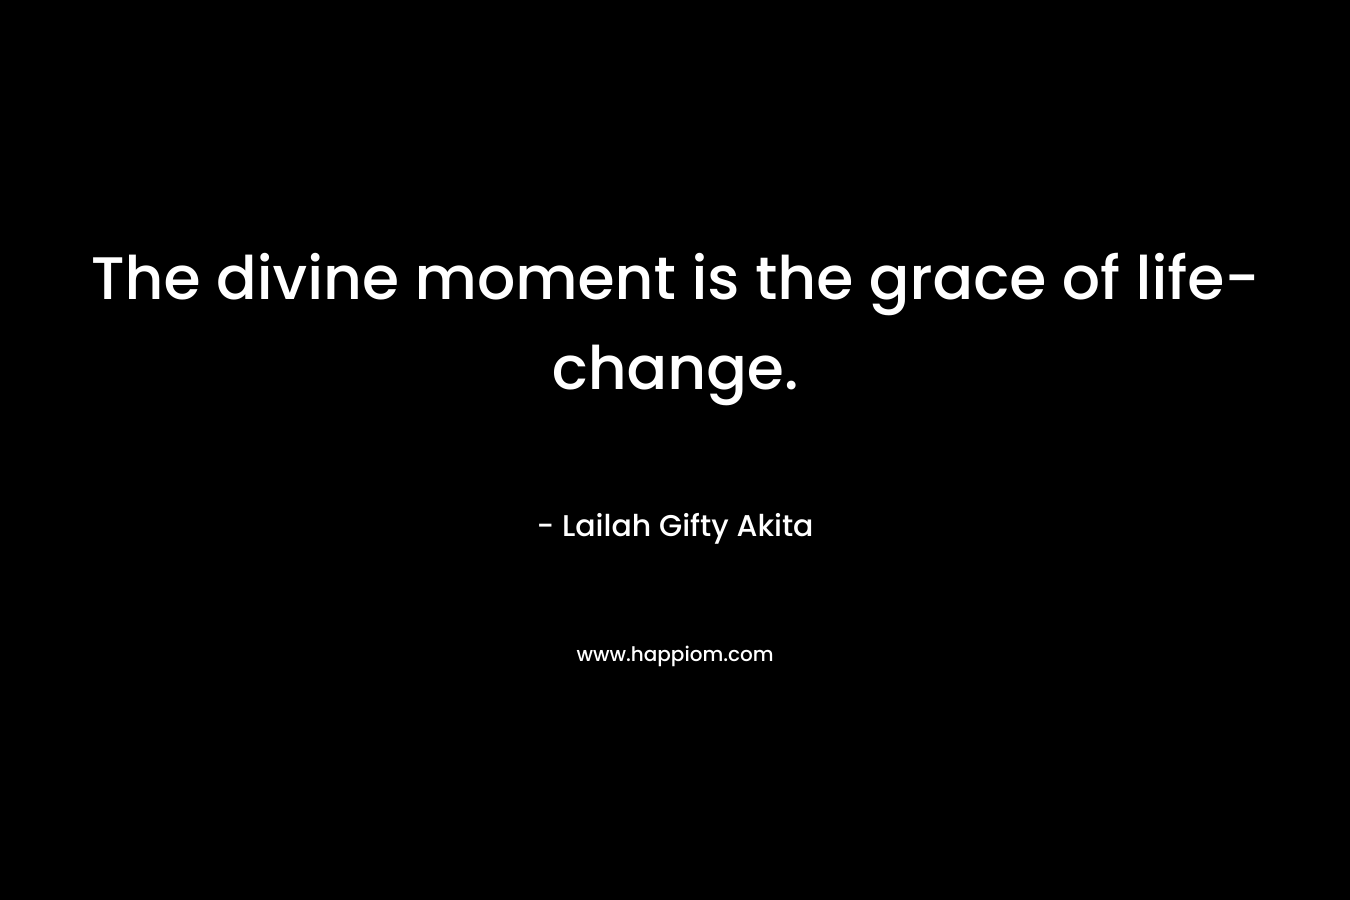 The divine moment is the grace of life-change.